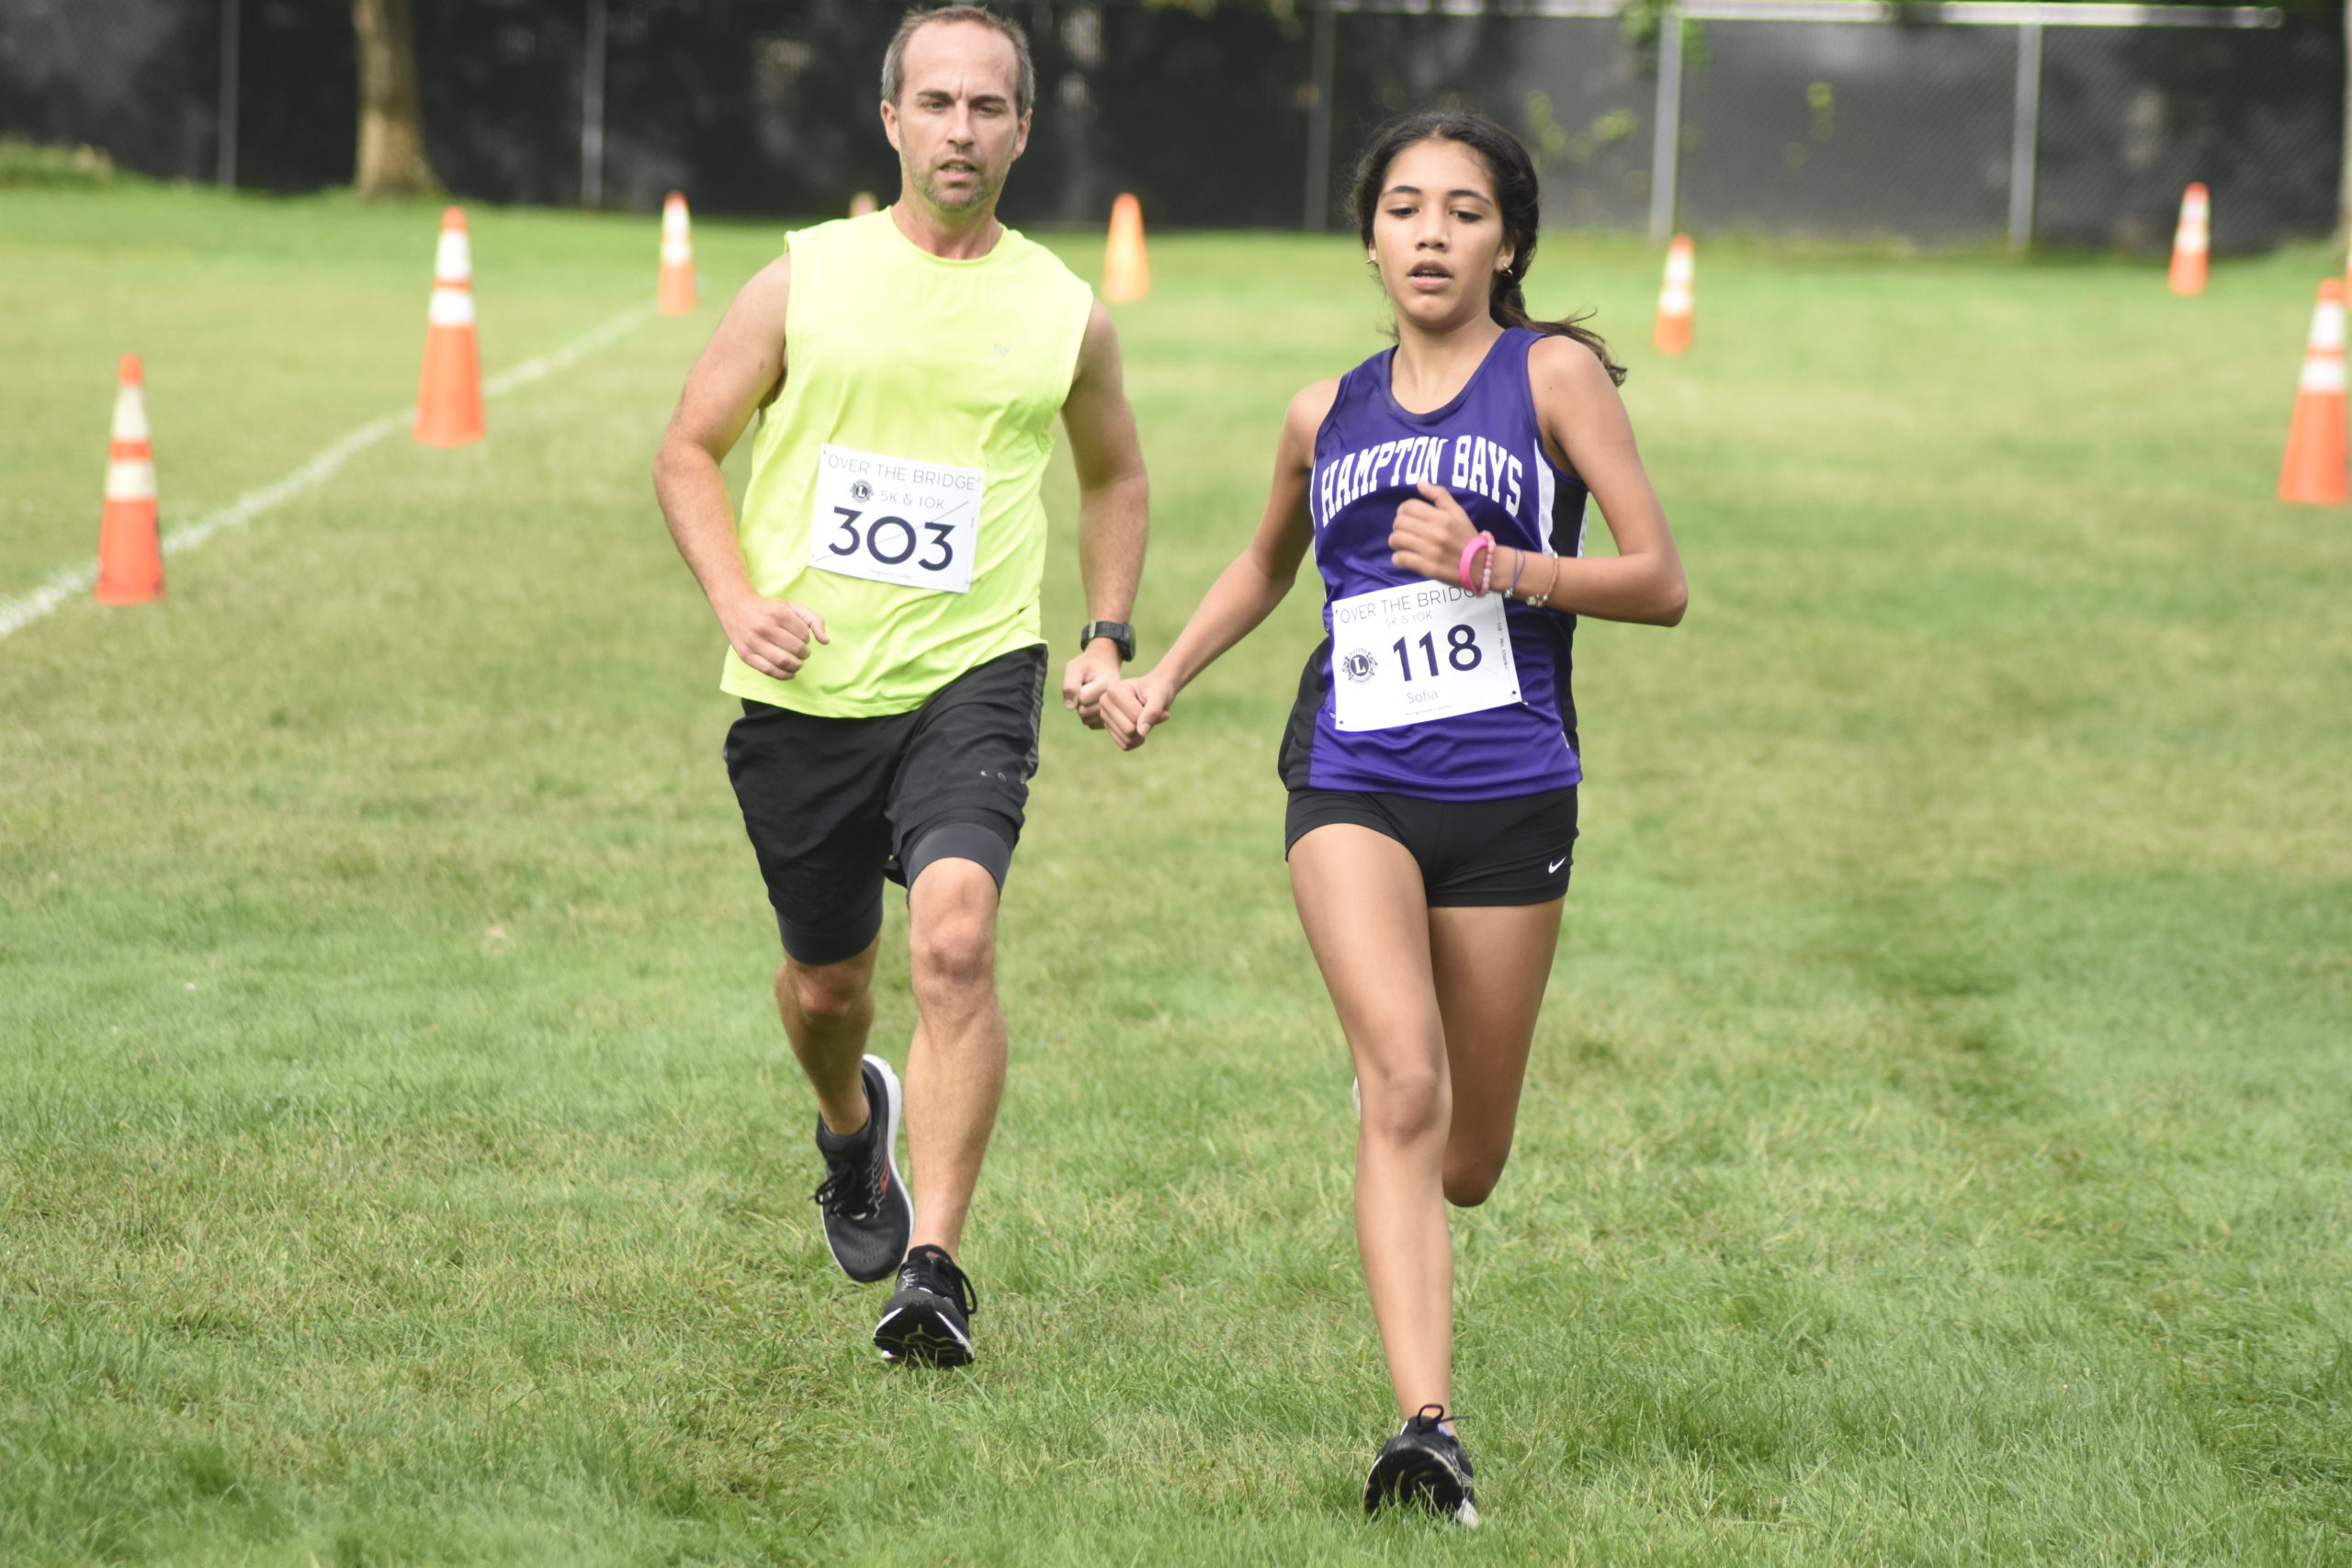 Hampton Bays girls cross country head coach Kevin O'Toole crosses the finish line with one of his runners Sofia Galavan.